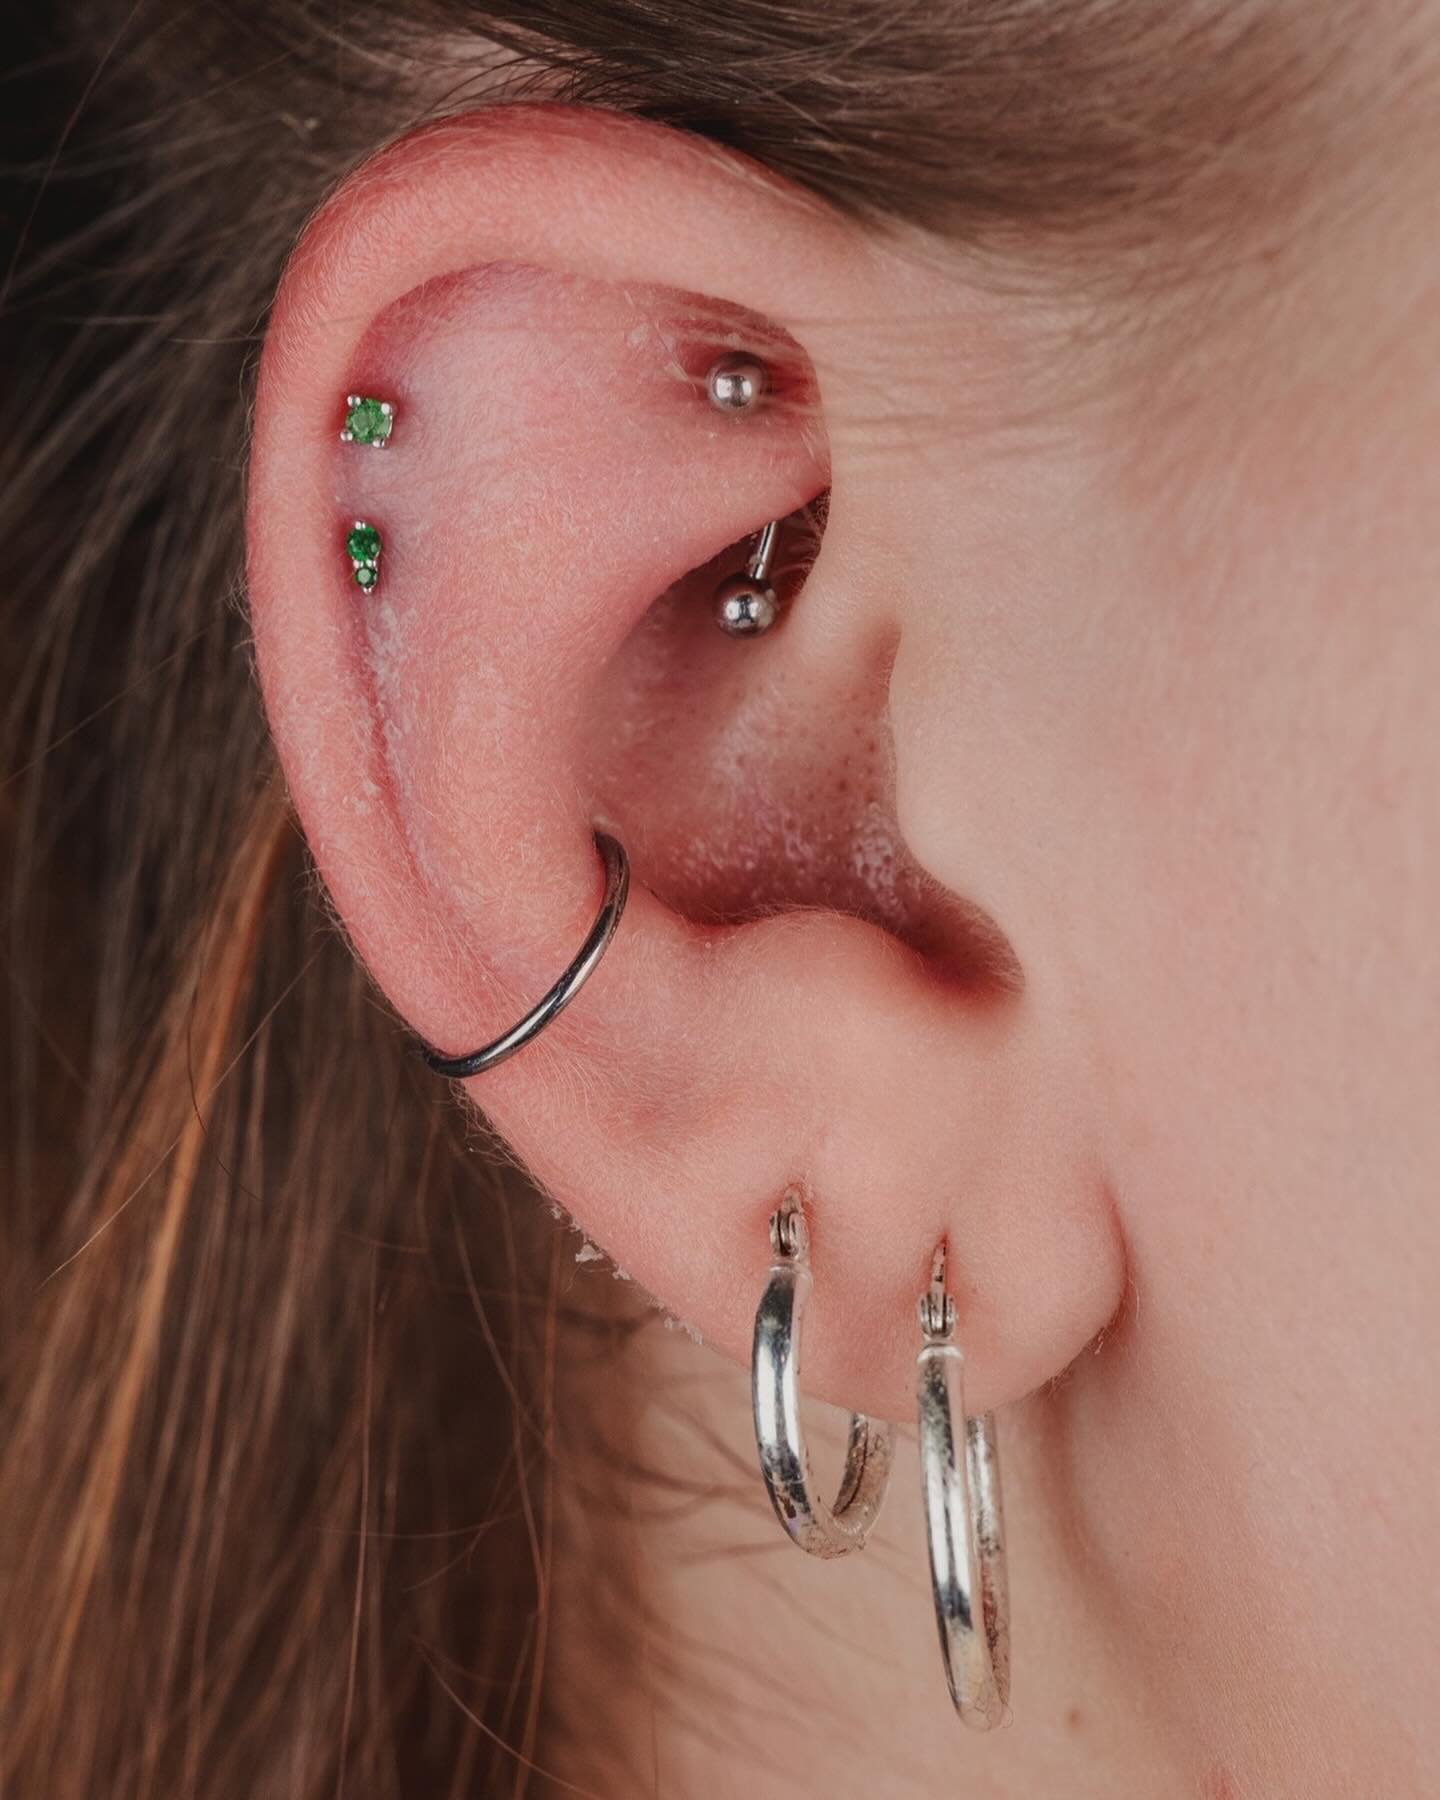 THE LIGHT🌞
 
IS SHINING
 
A perfect lil pop of green in this new double helix for Emma, with some white gold and tsavorite from Buddha and green CZ from Ember! Piercings performed by William🌿✨
 
~  @passenger.parasite ~ 
⠀⠀⠀⠀⠀⠀⠀⠀⠀
~  @emberbodyjewe